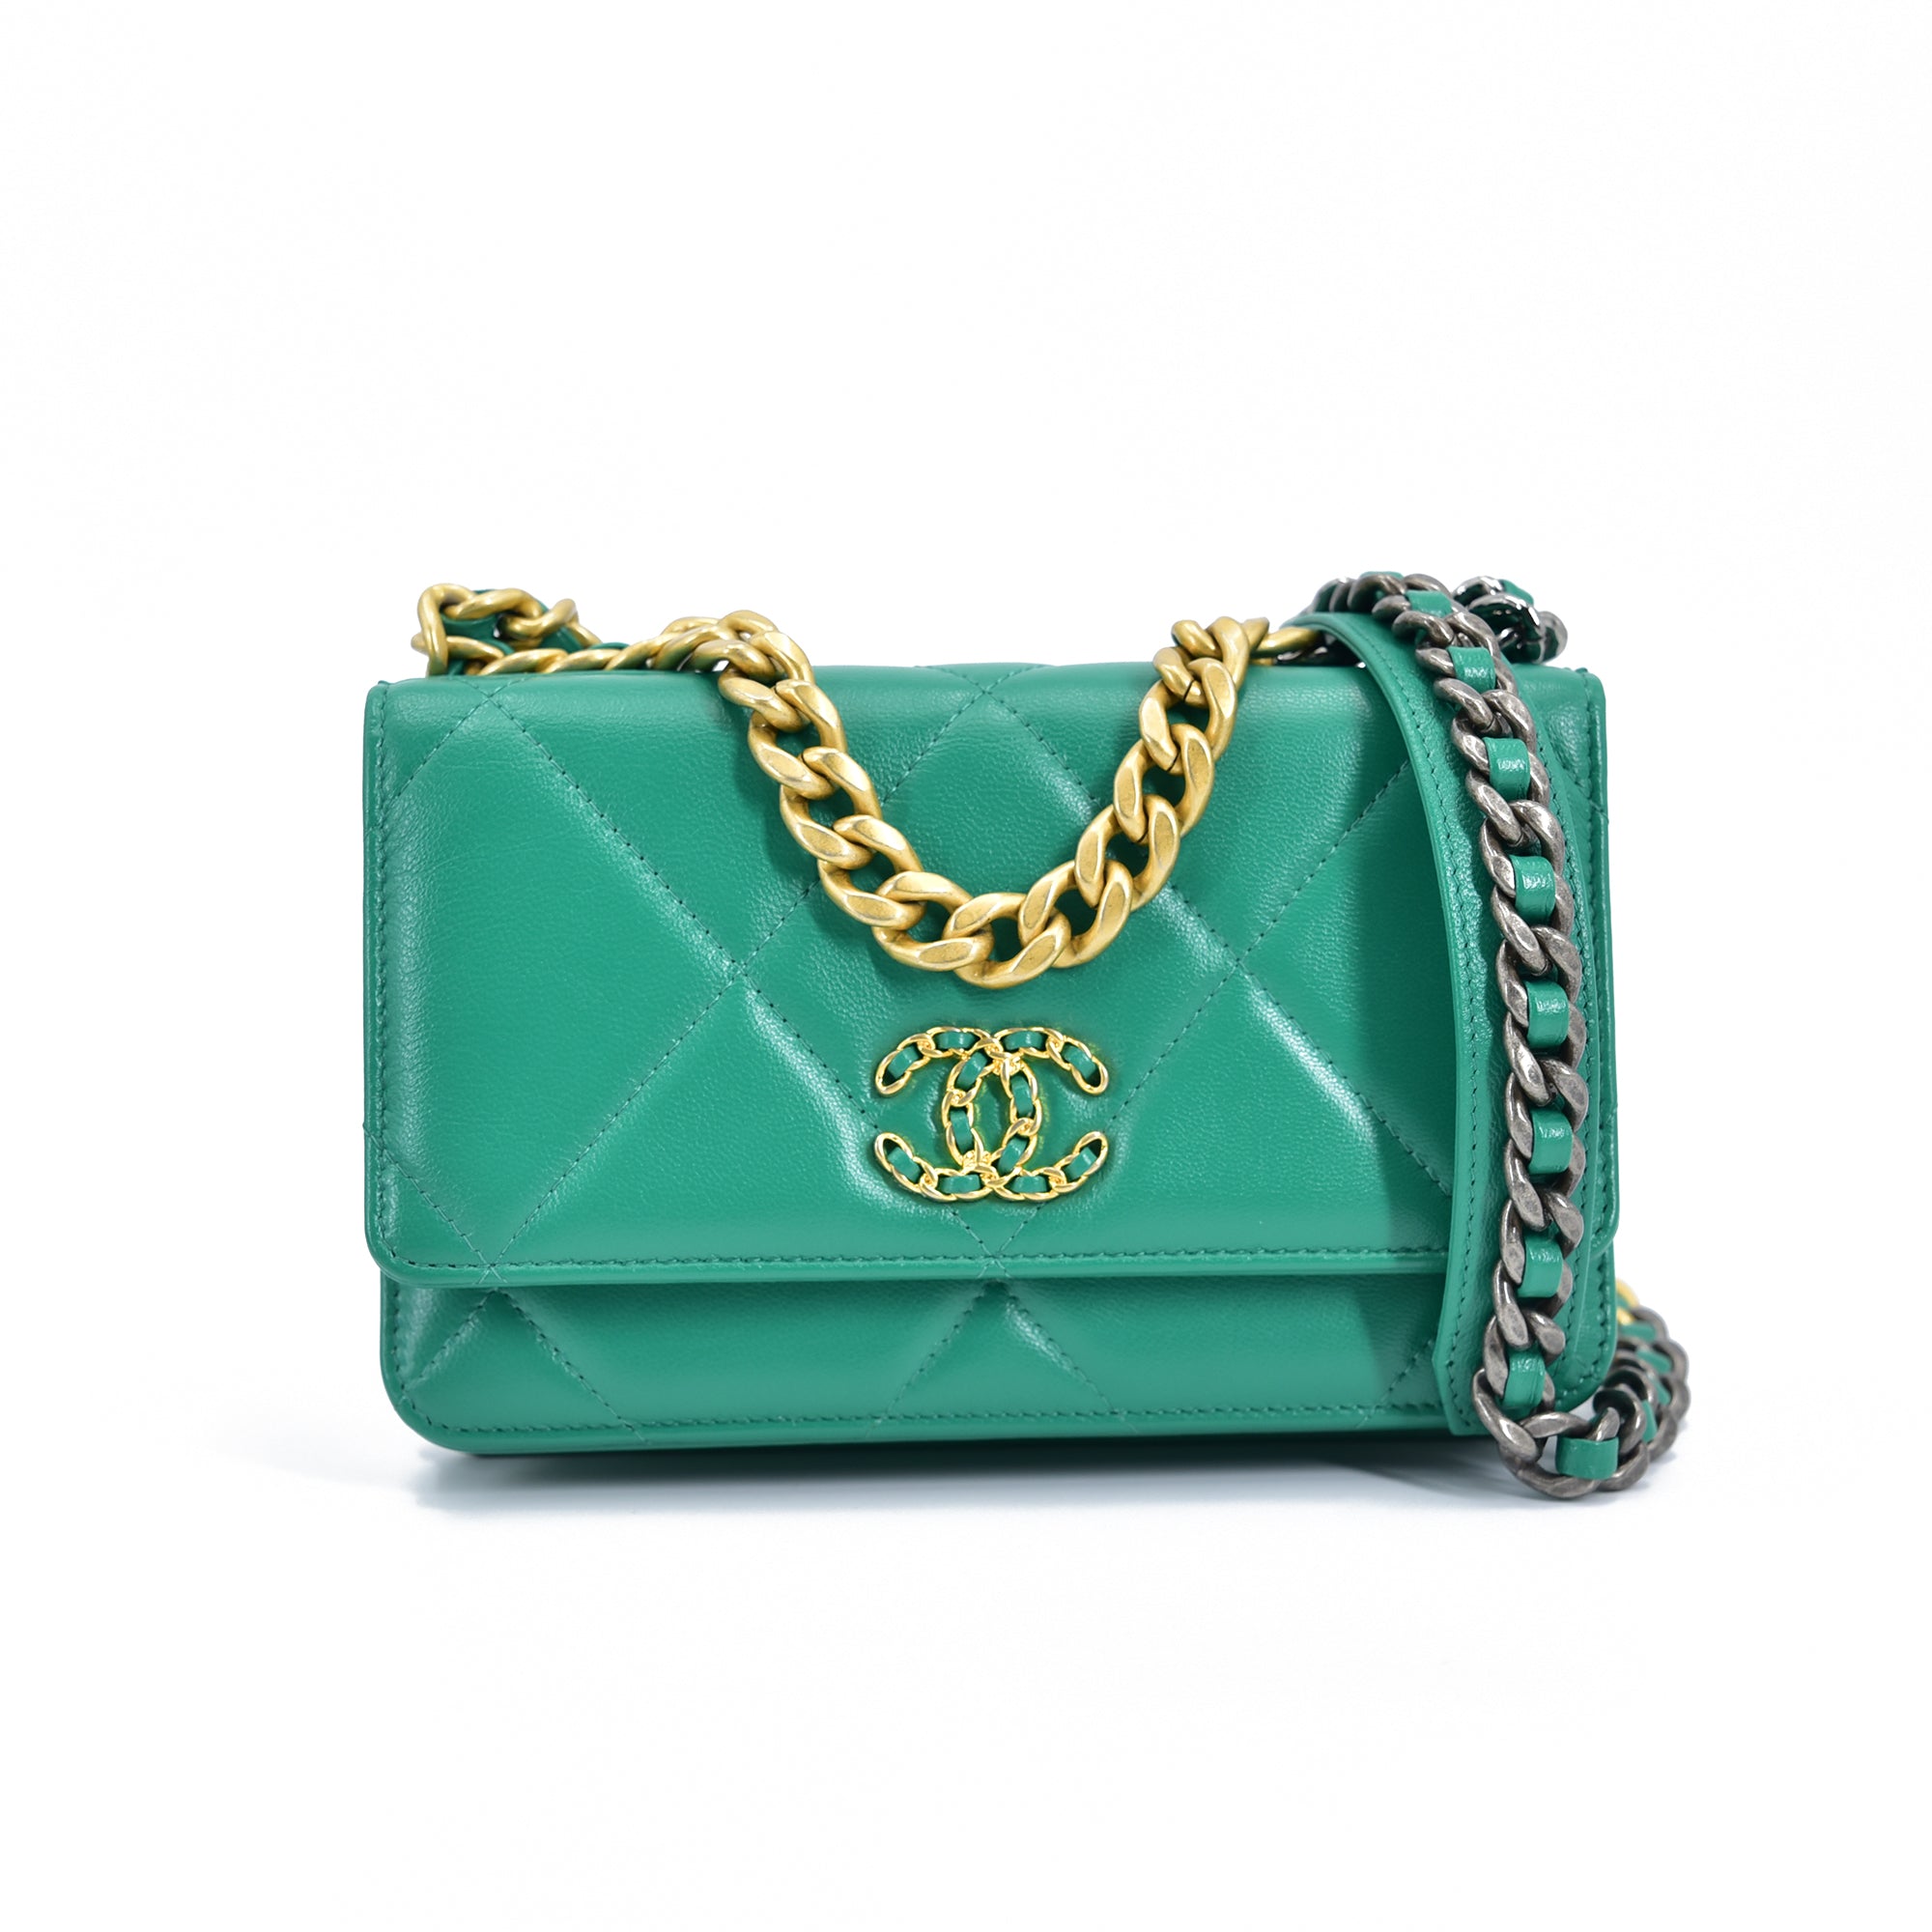 Chanel Green 19 Wallet on Chain